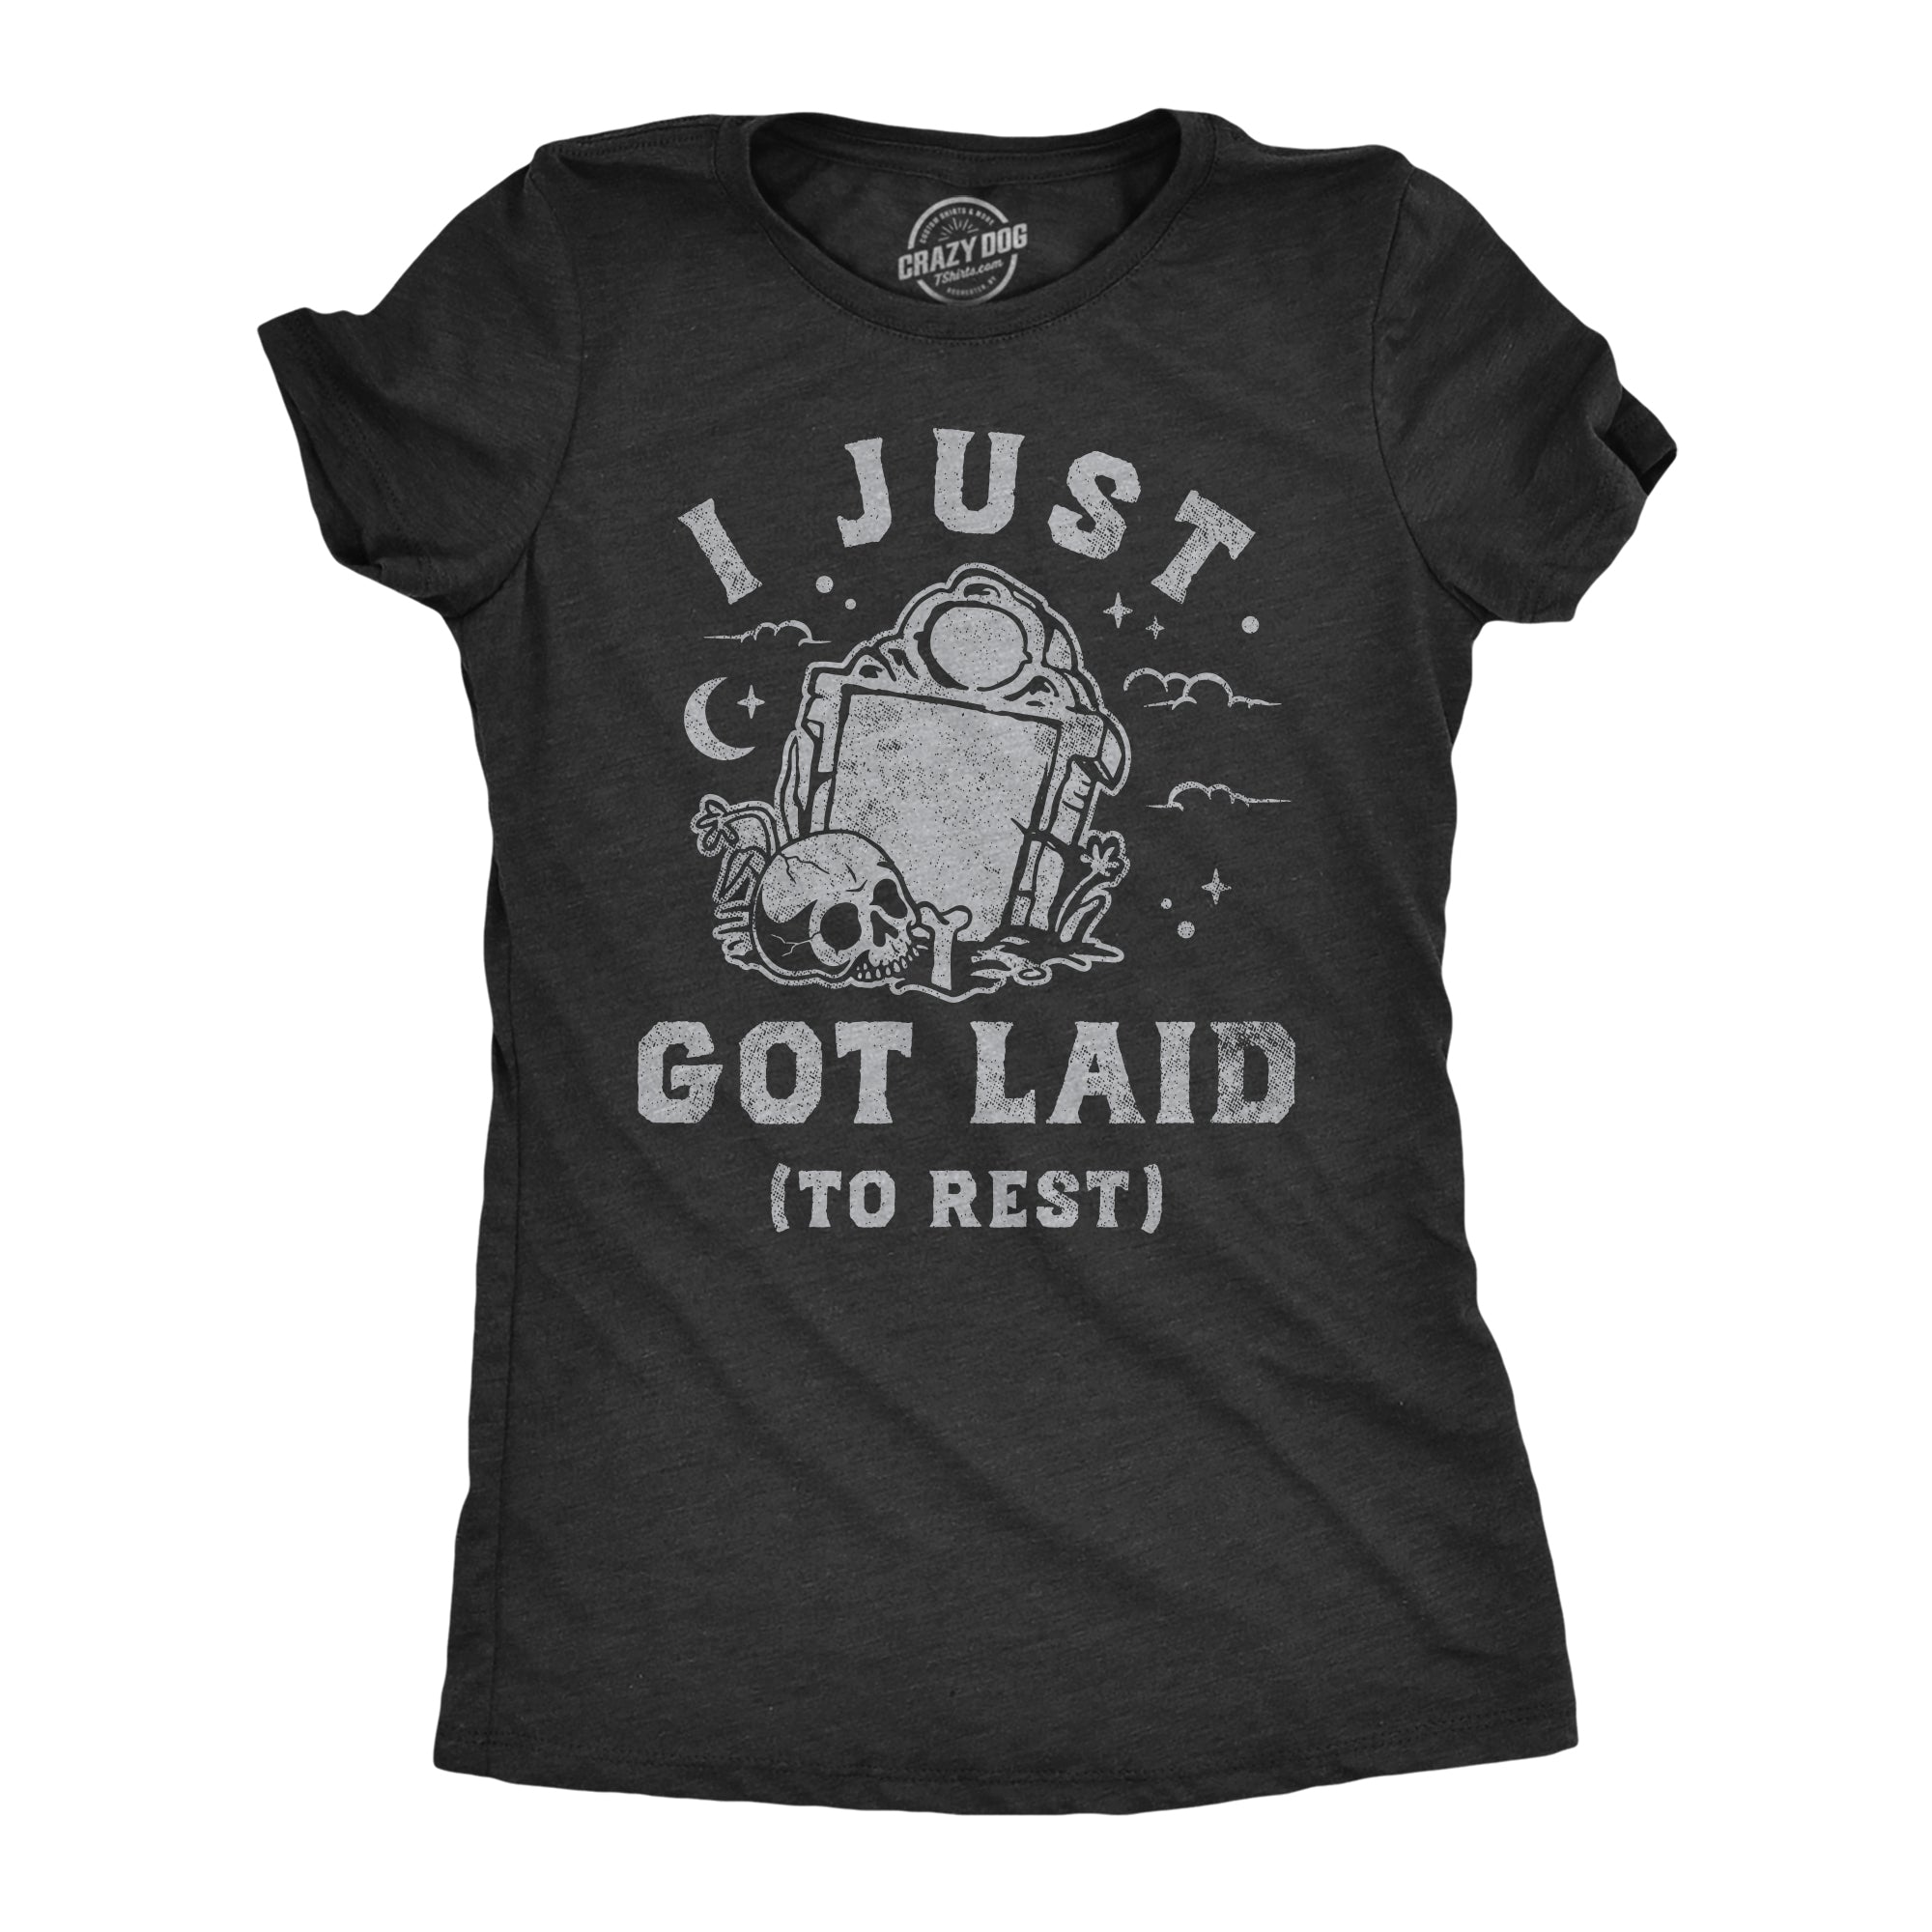 Funny Heather Black - LAID I Just Got Laid To Rest Womens T Shirt Nerdy Halloween sex sarcastic Tee